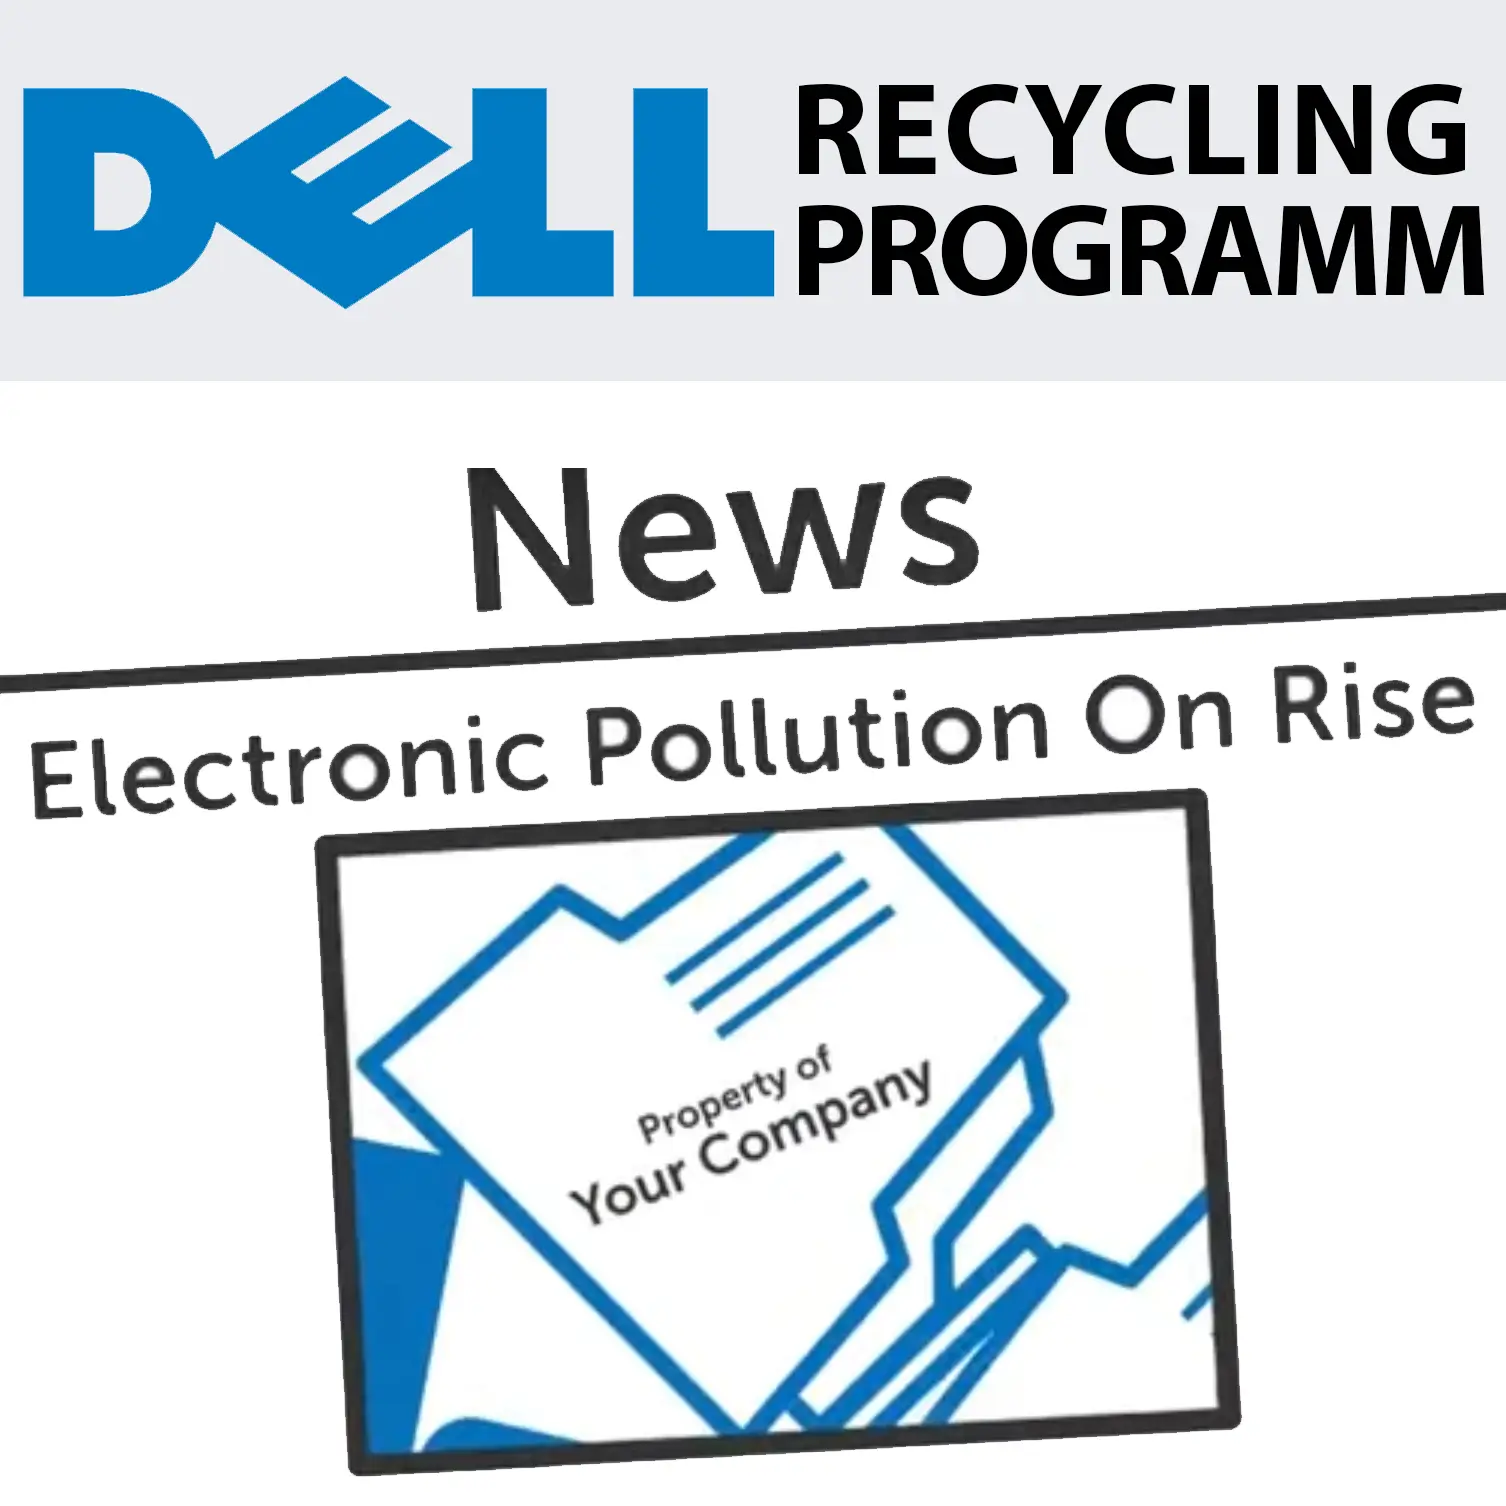 Dell recycling programm